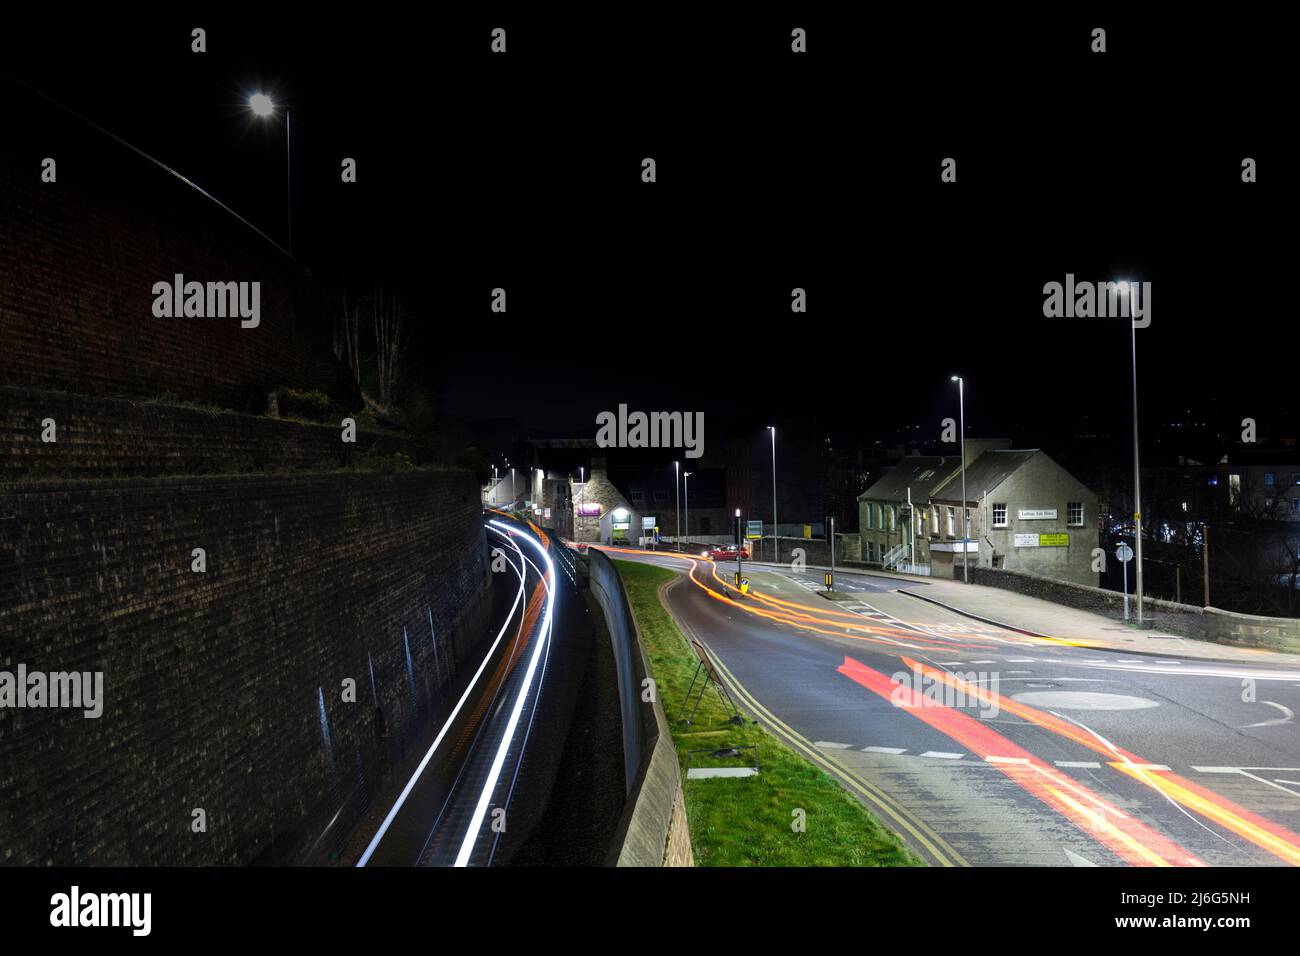 Light trails on the road and railway line in Galashiels town centre, at night, Scottish Borders, UK Stock Photo